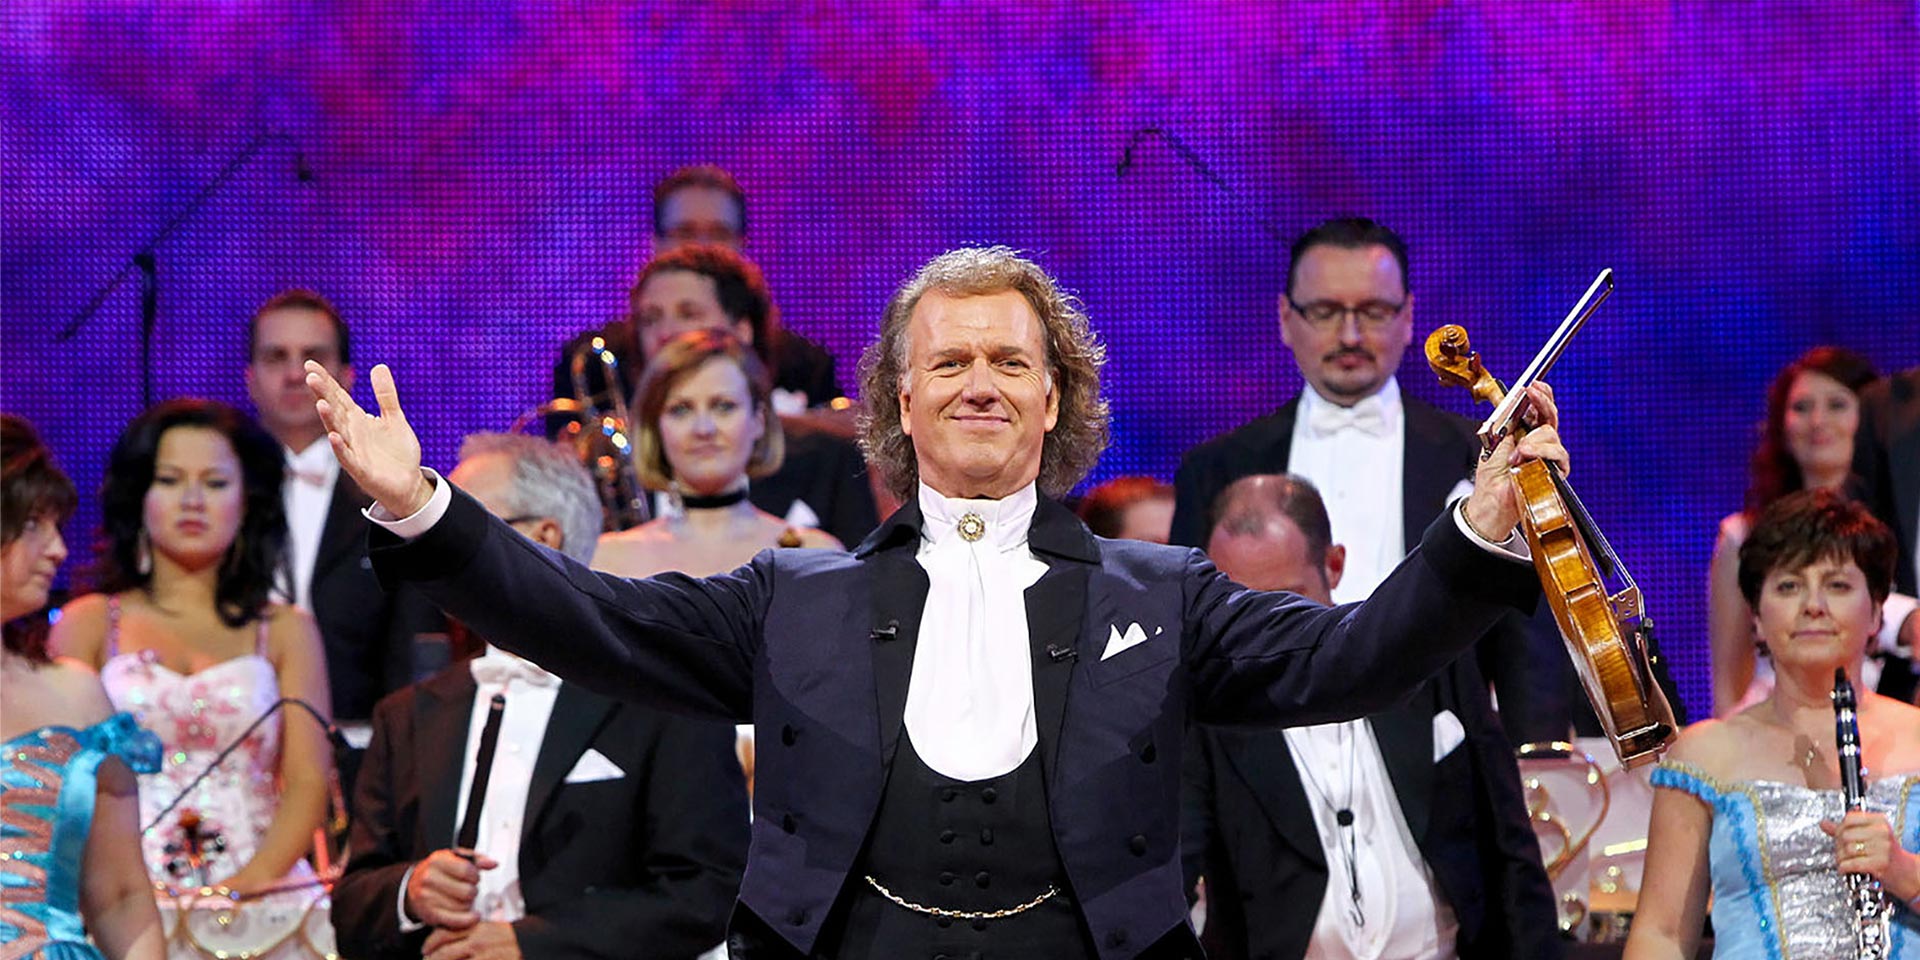 tourhub | Just Go Holidays | André Rieu & his Johann Strauss Orchestra – Live in Liverpool (by Coach) 